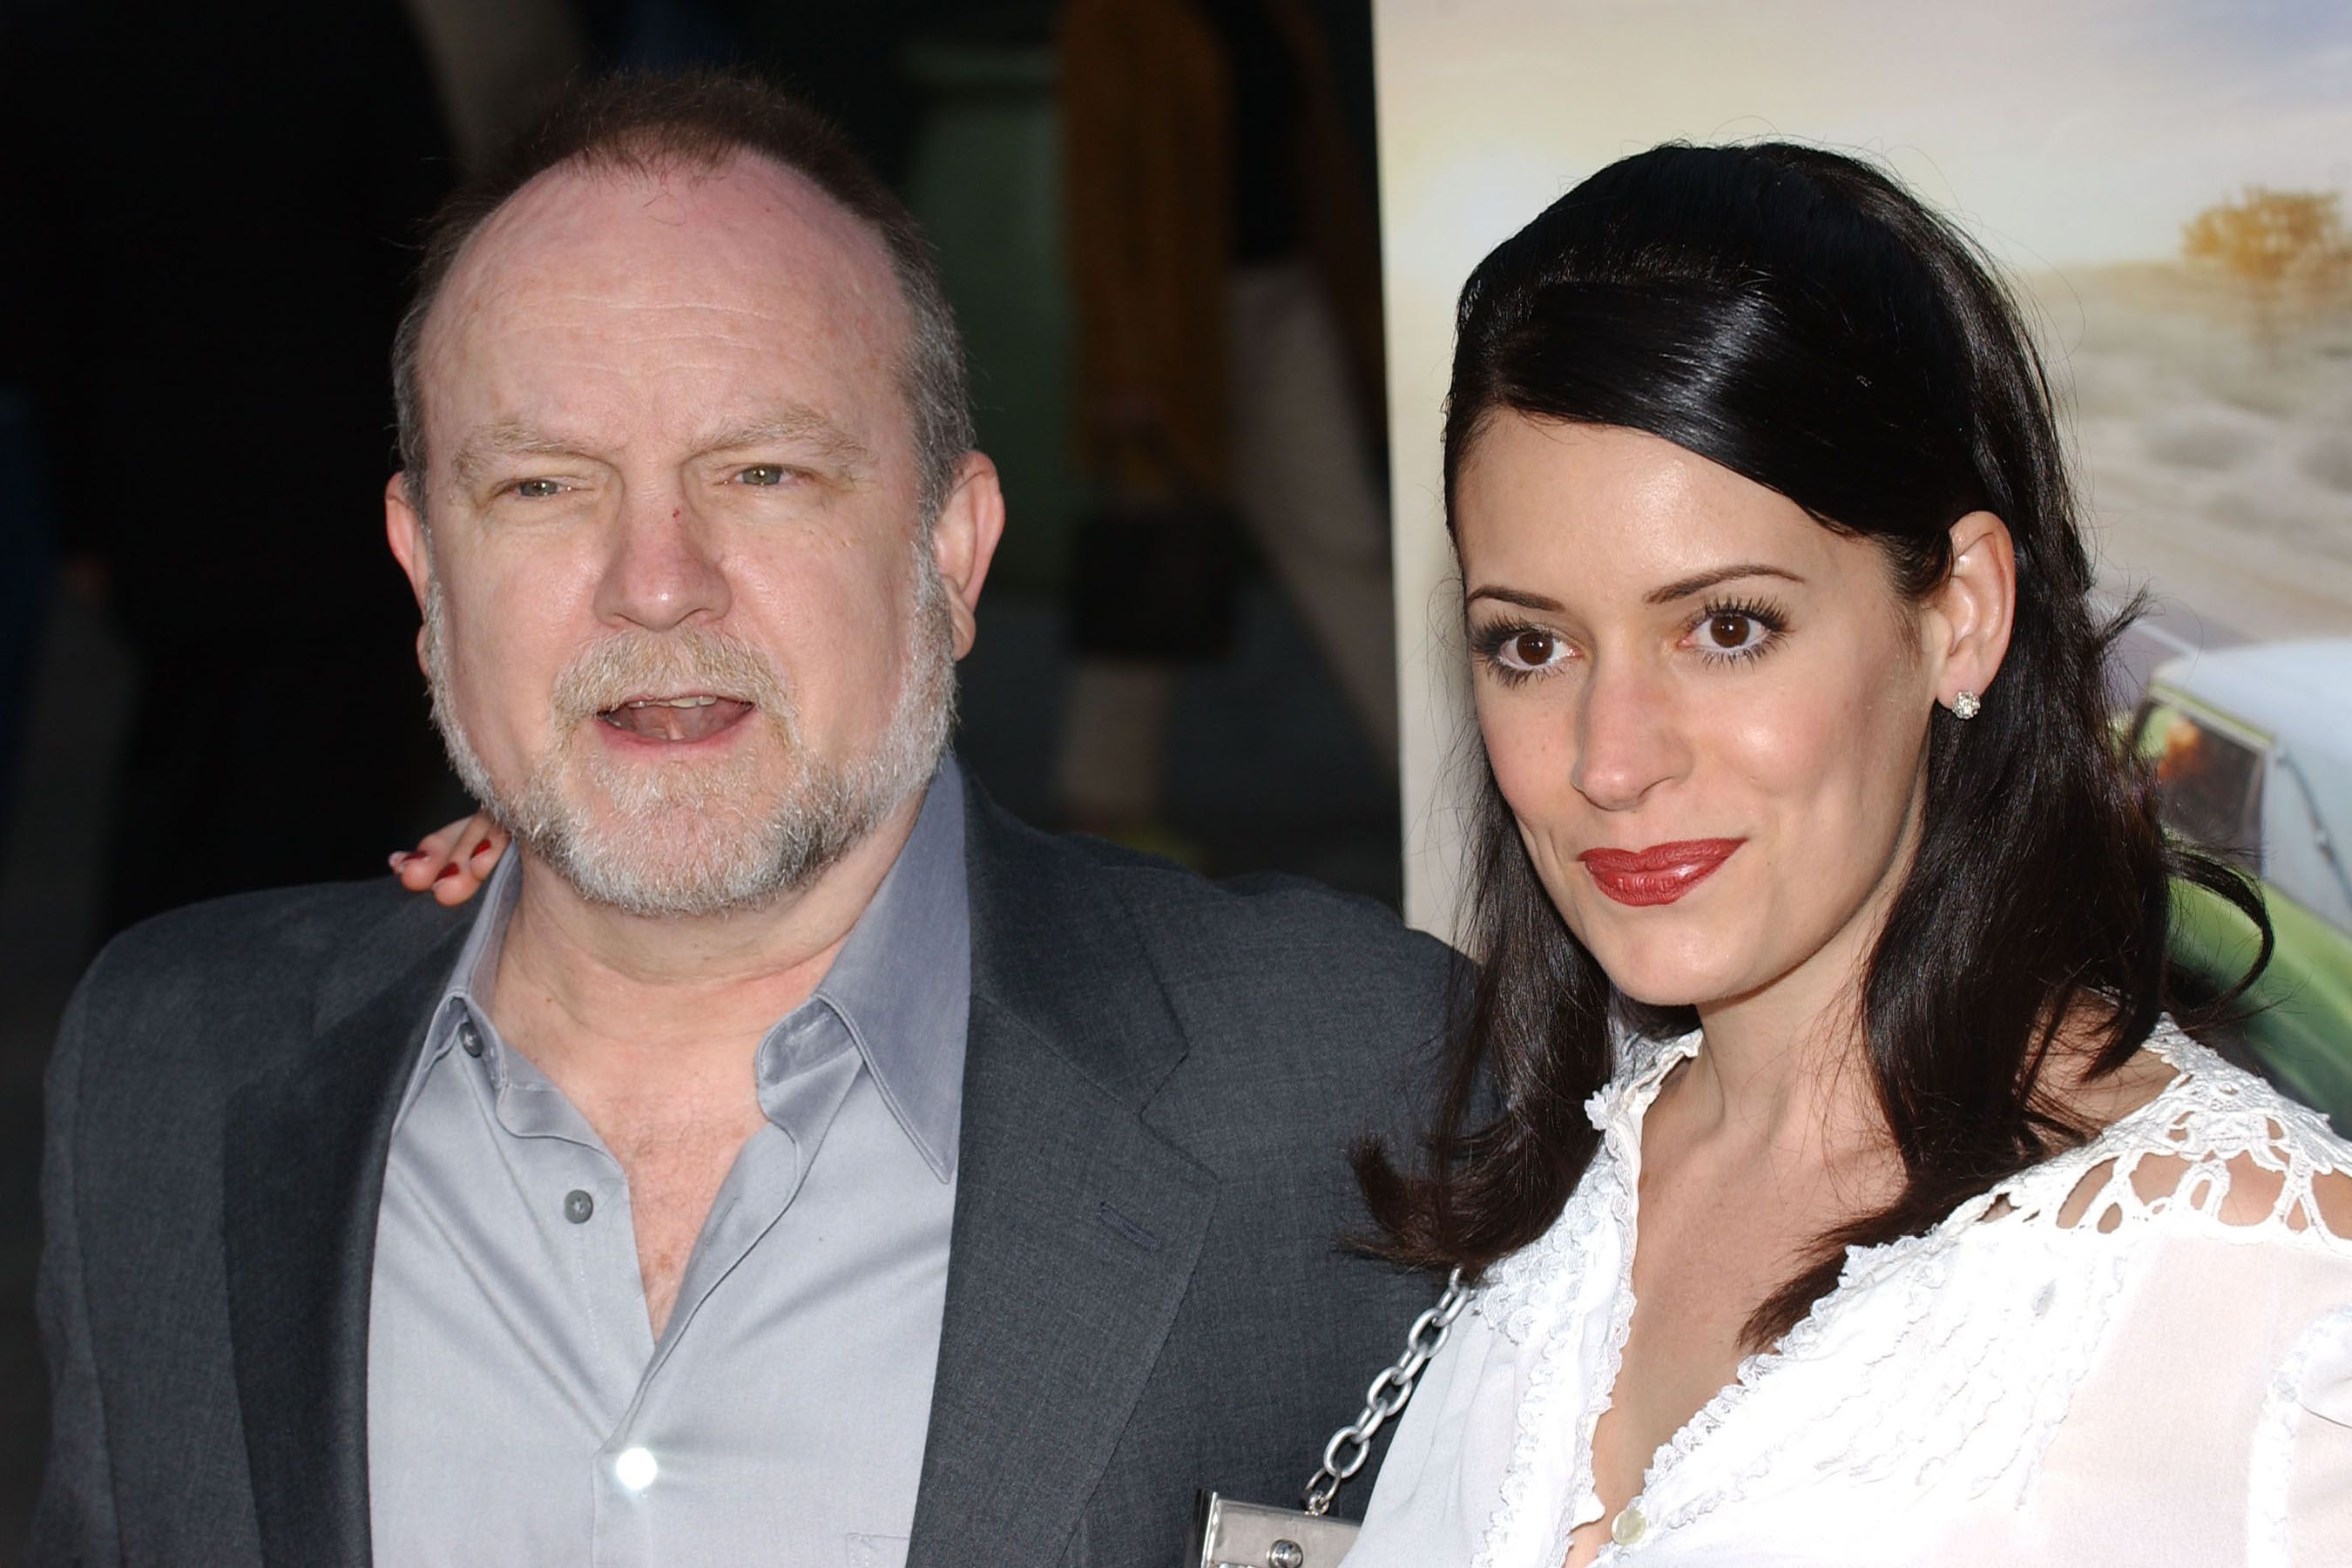 Jim Beaver and Paget Brewster at the HBOs SIX FEET UNDER Season 5 Premiere